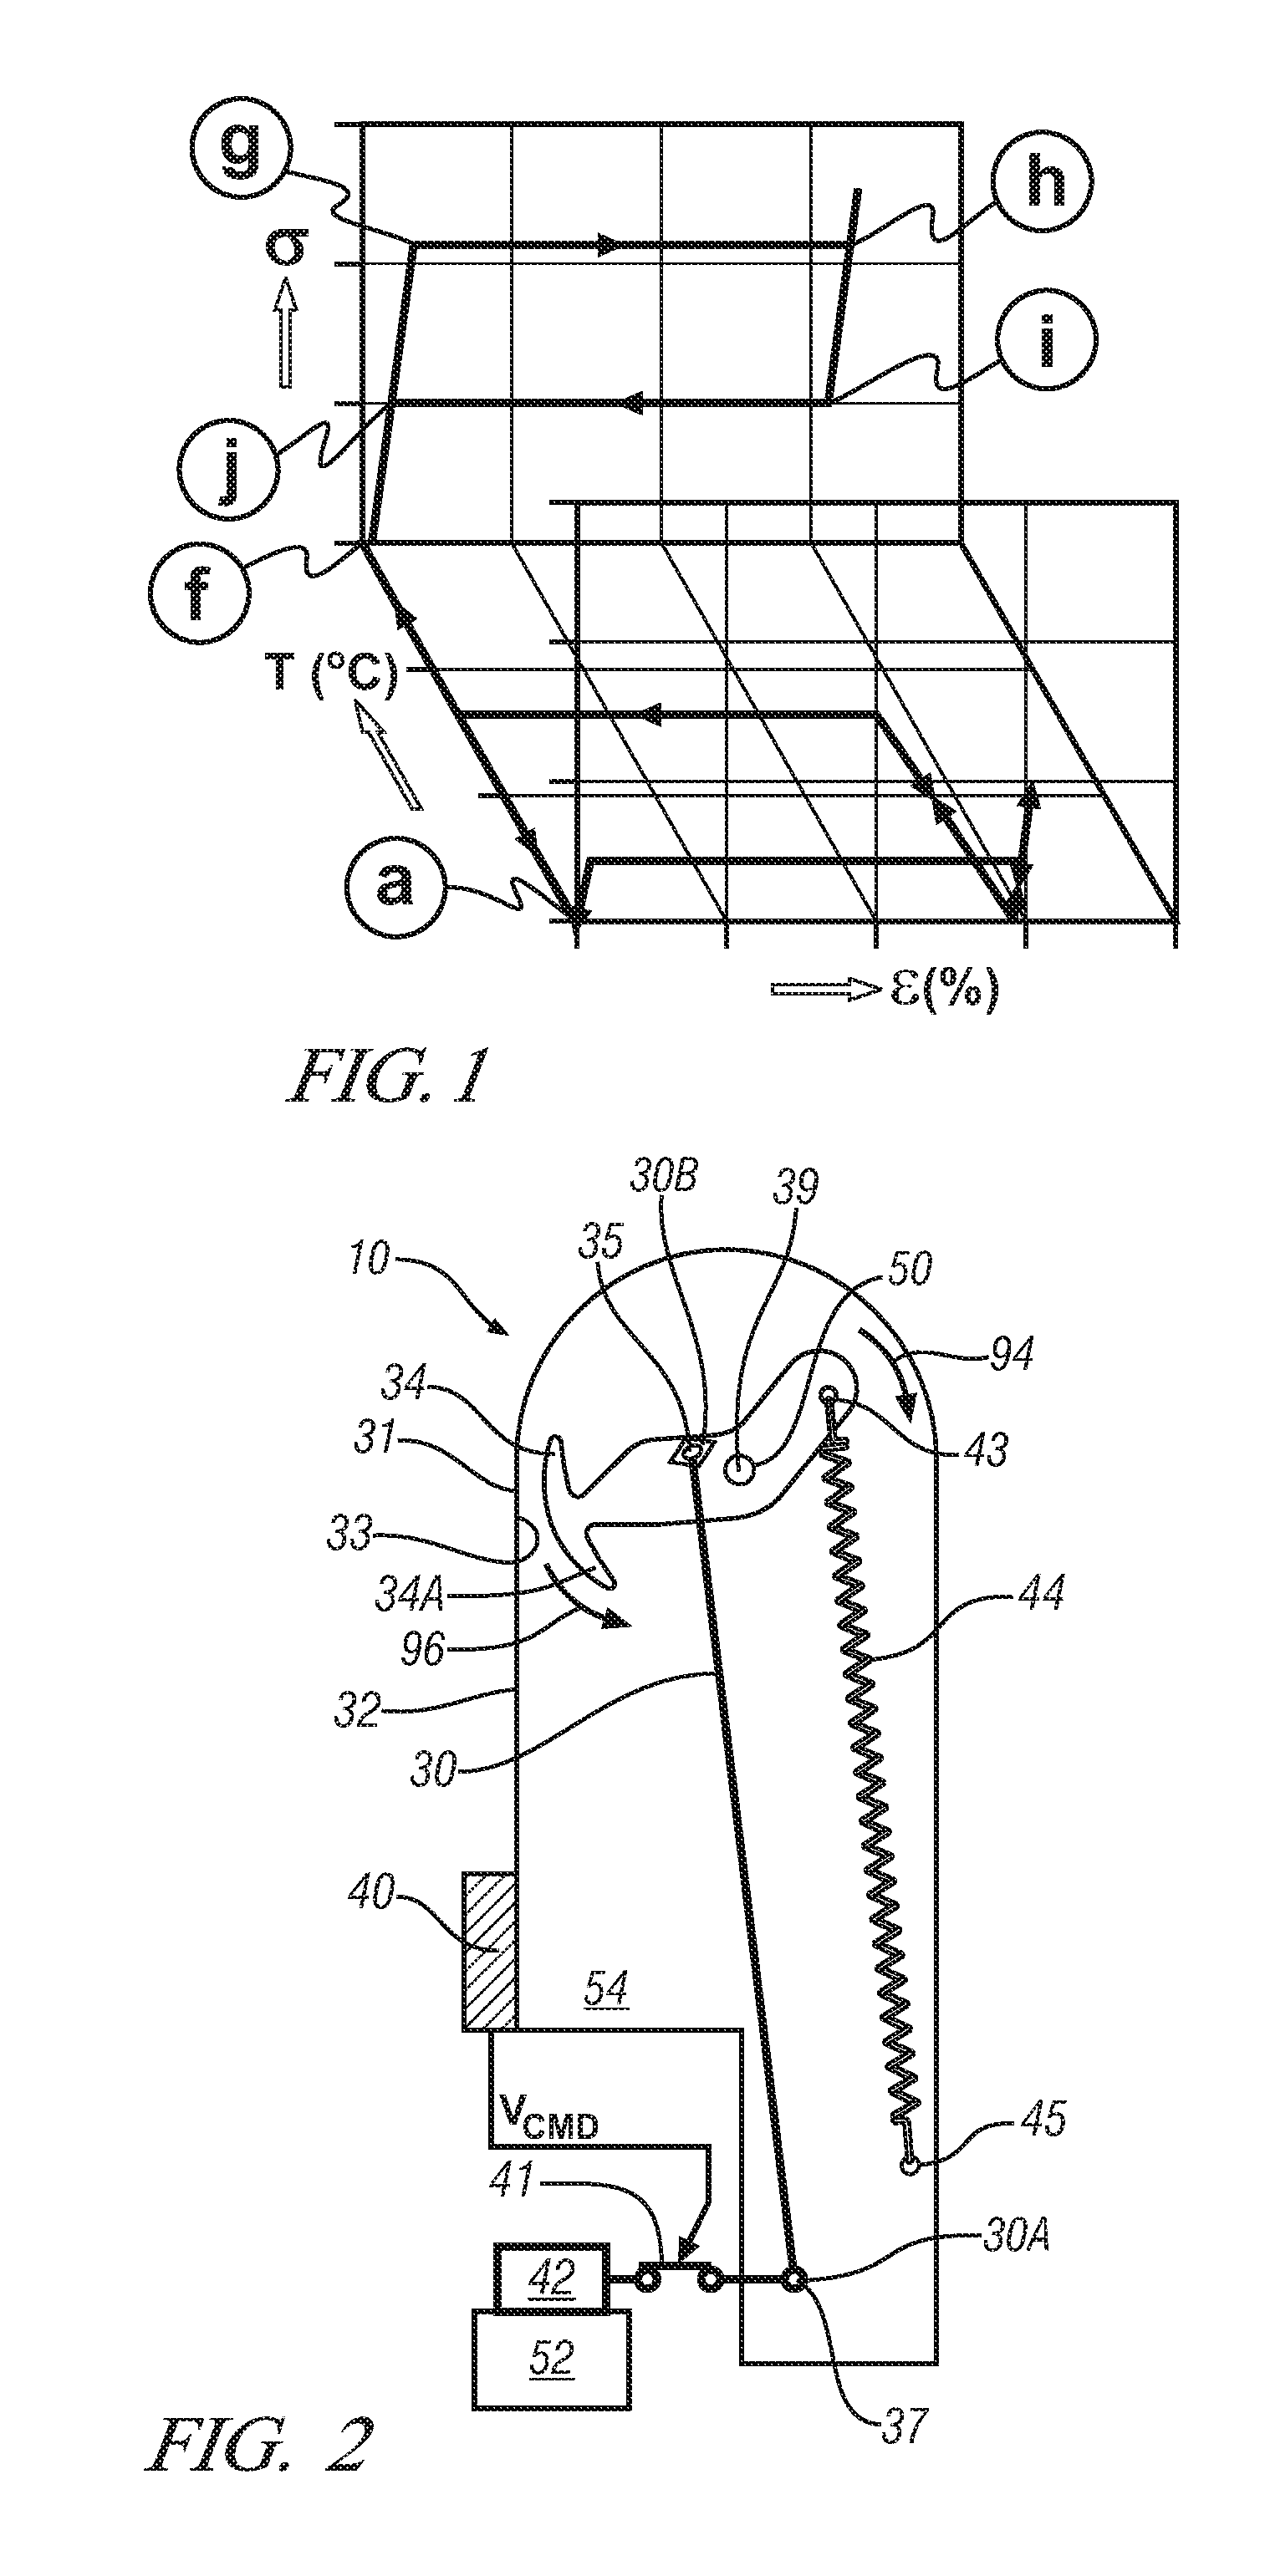 Actuator system including an active material